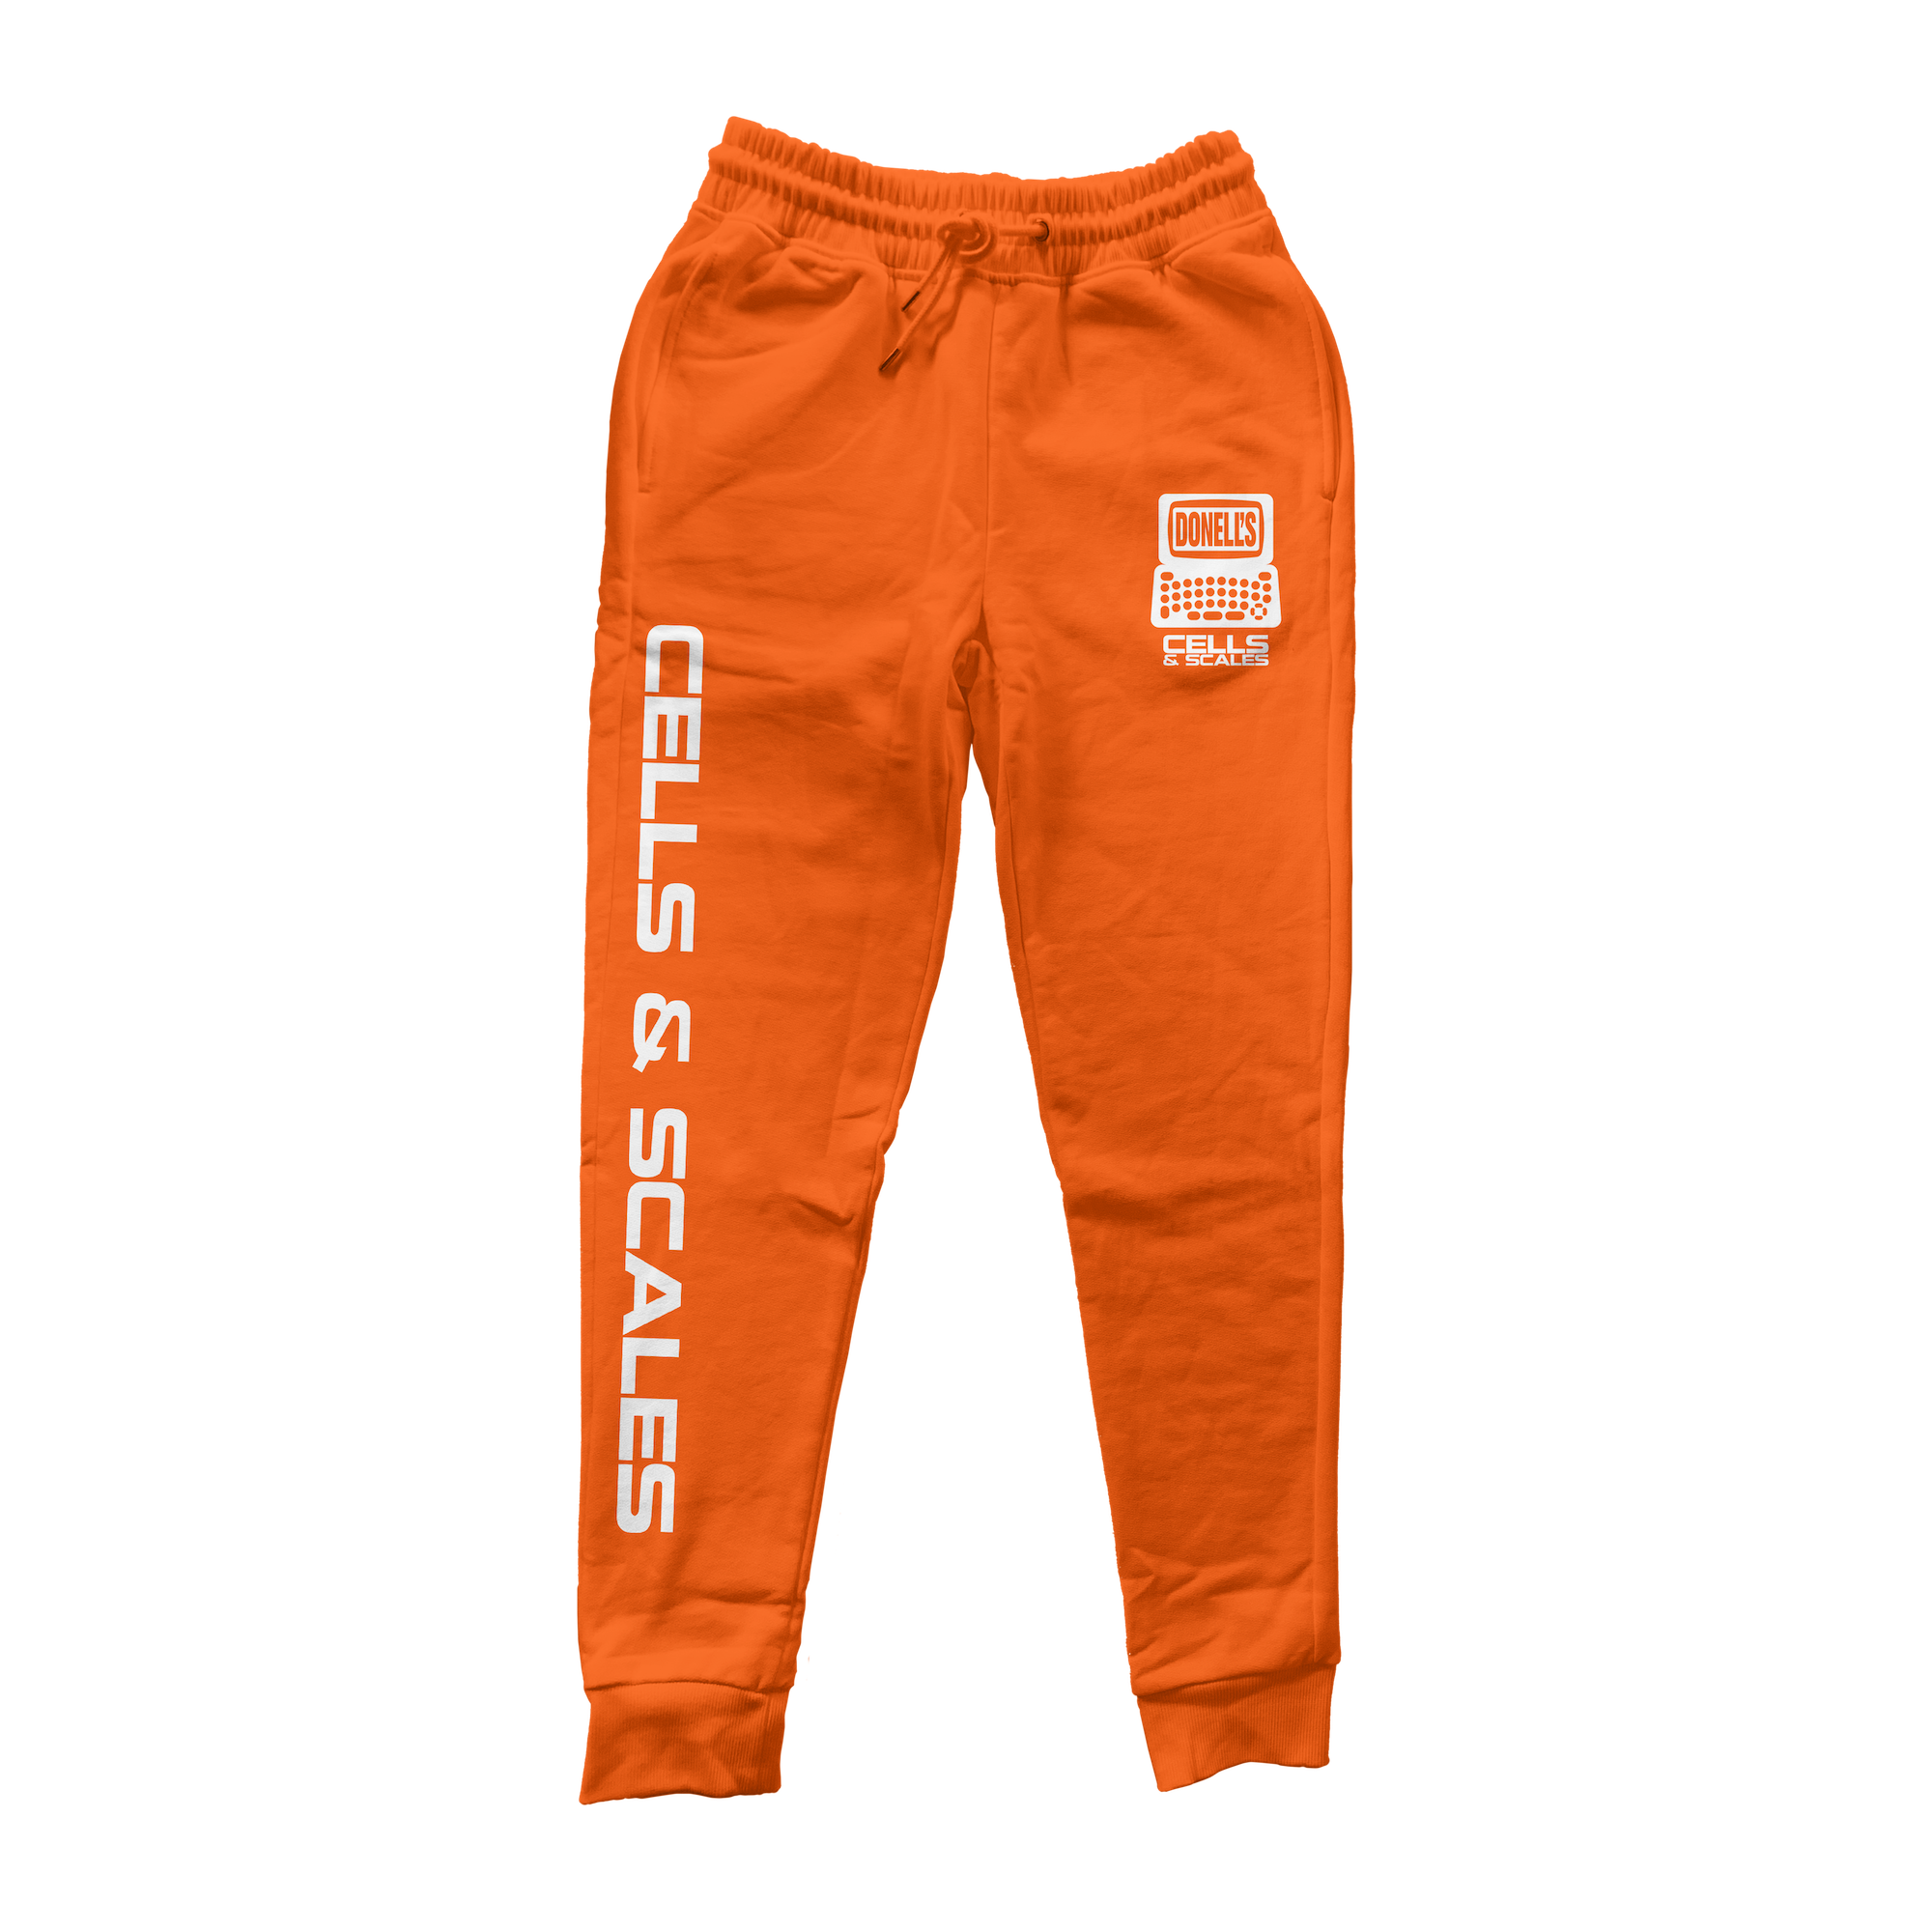 Donell's Cells & Scales sweats